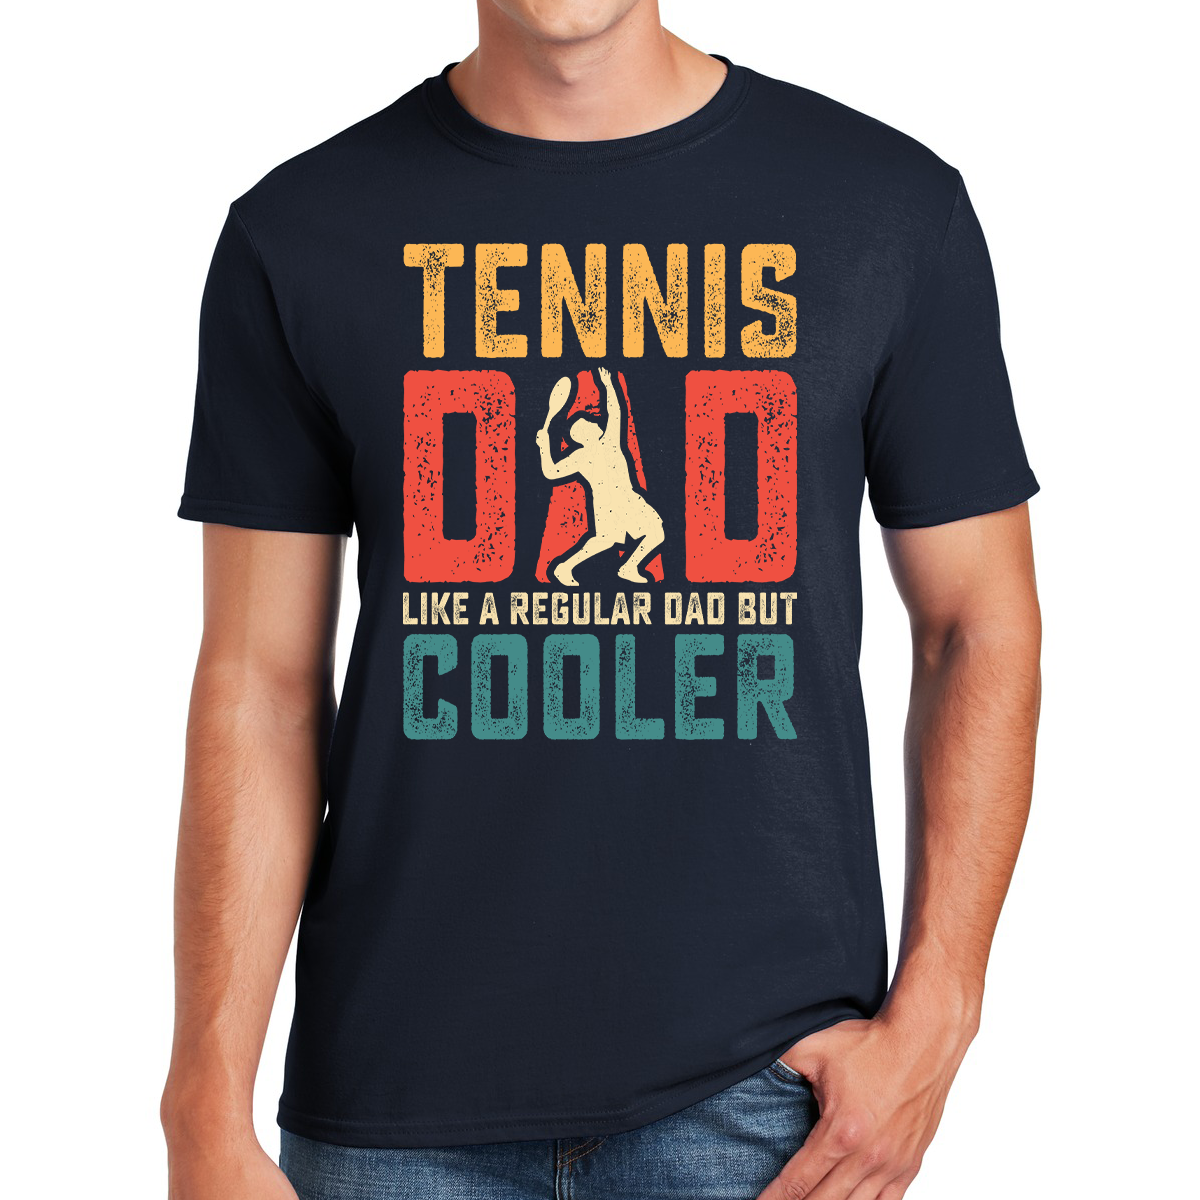 Tennis Dad Like a Regular Dad But With A Cooler Swing Gift For Dads T-shirt